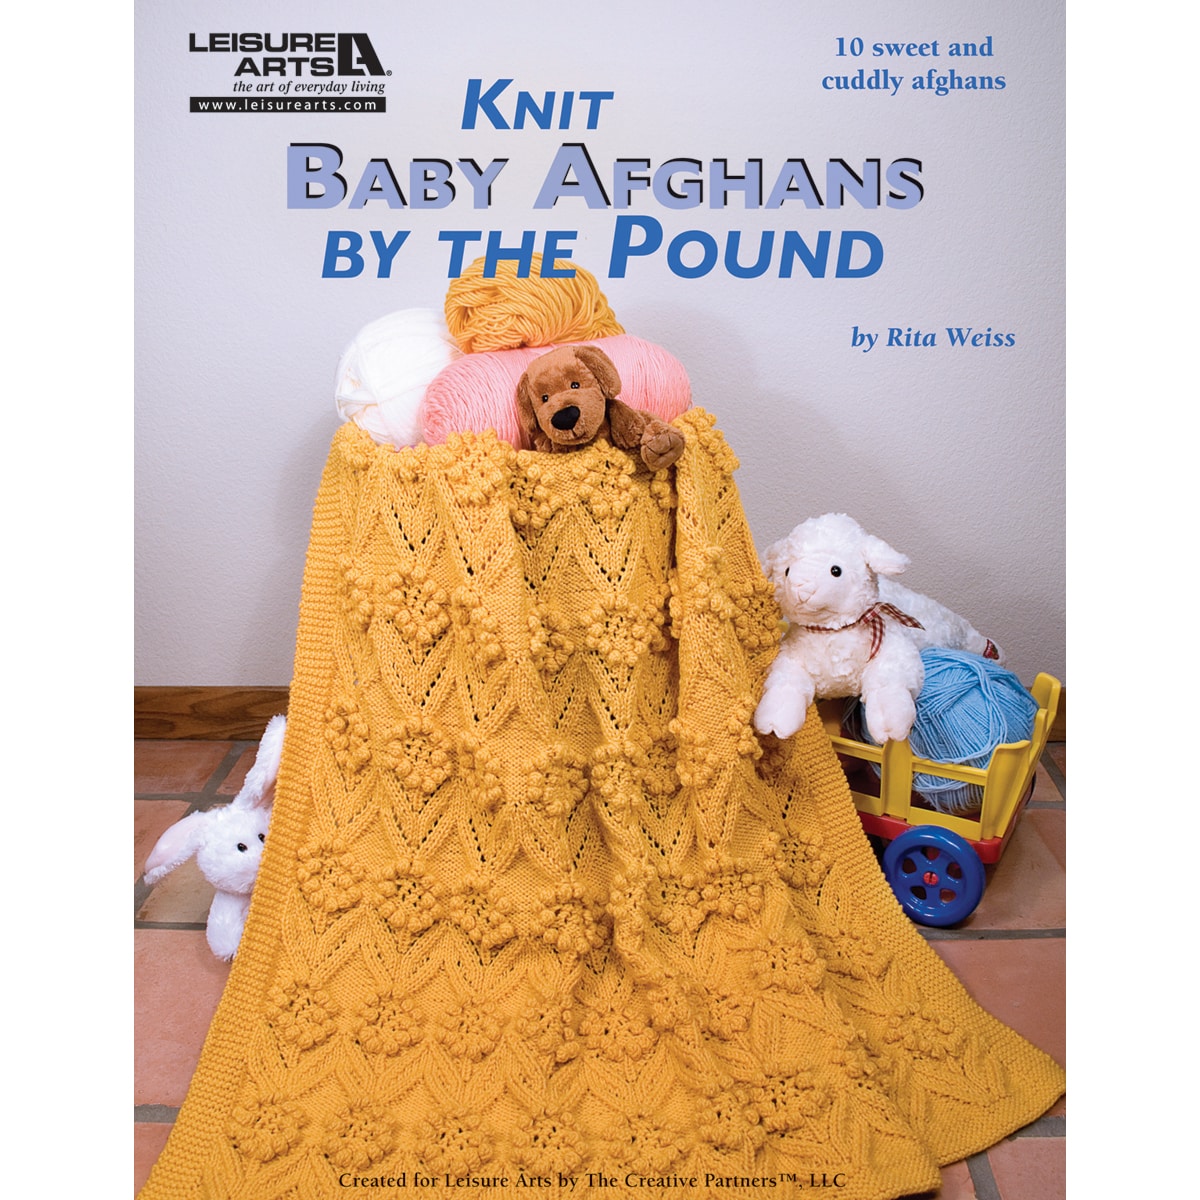 Leisure Arts knit Baby Afghans By The Pound